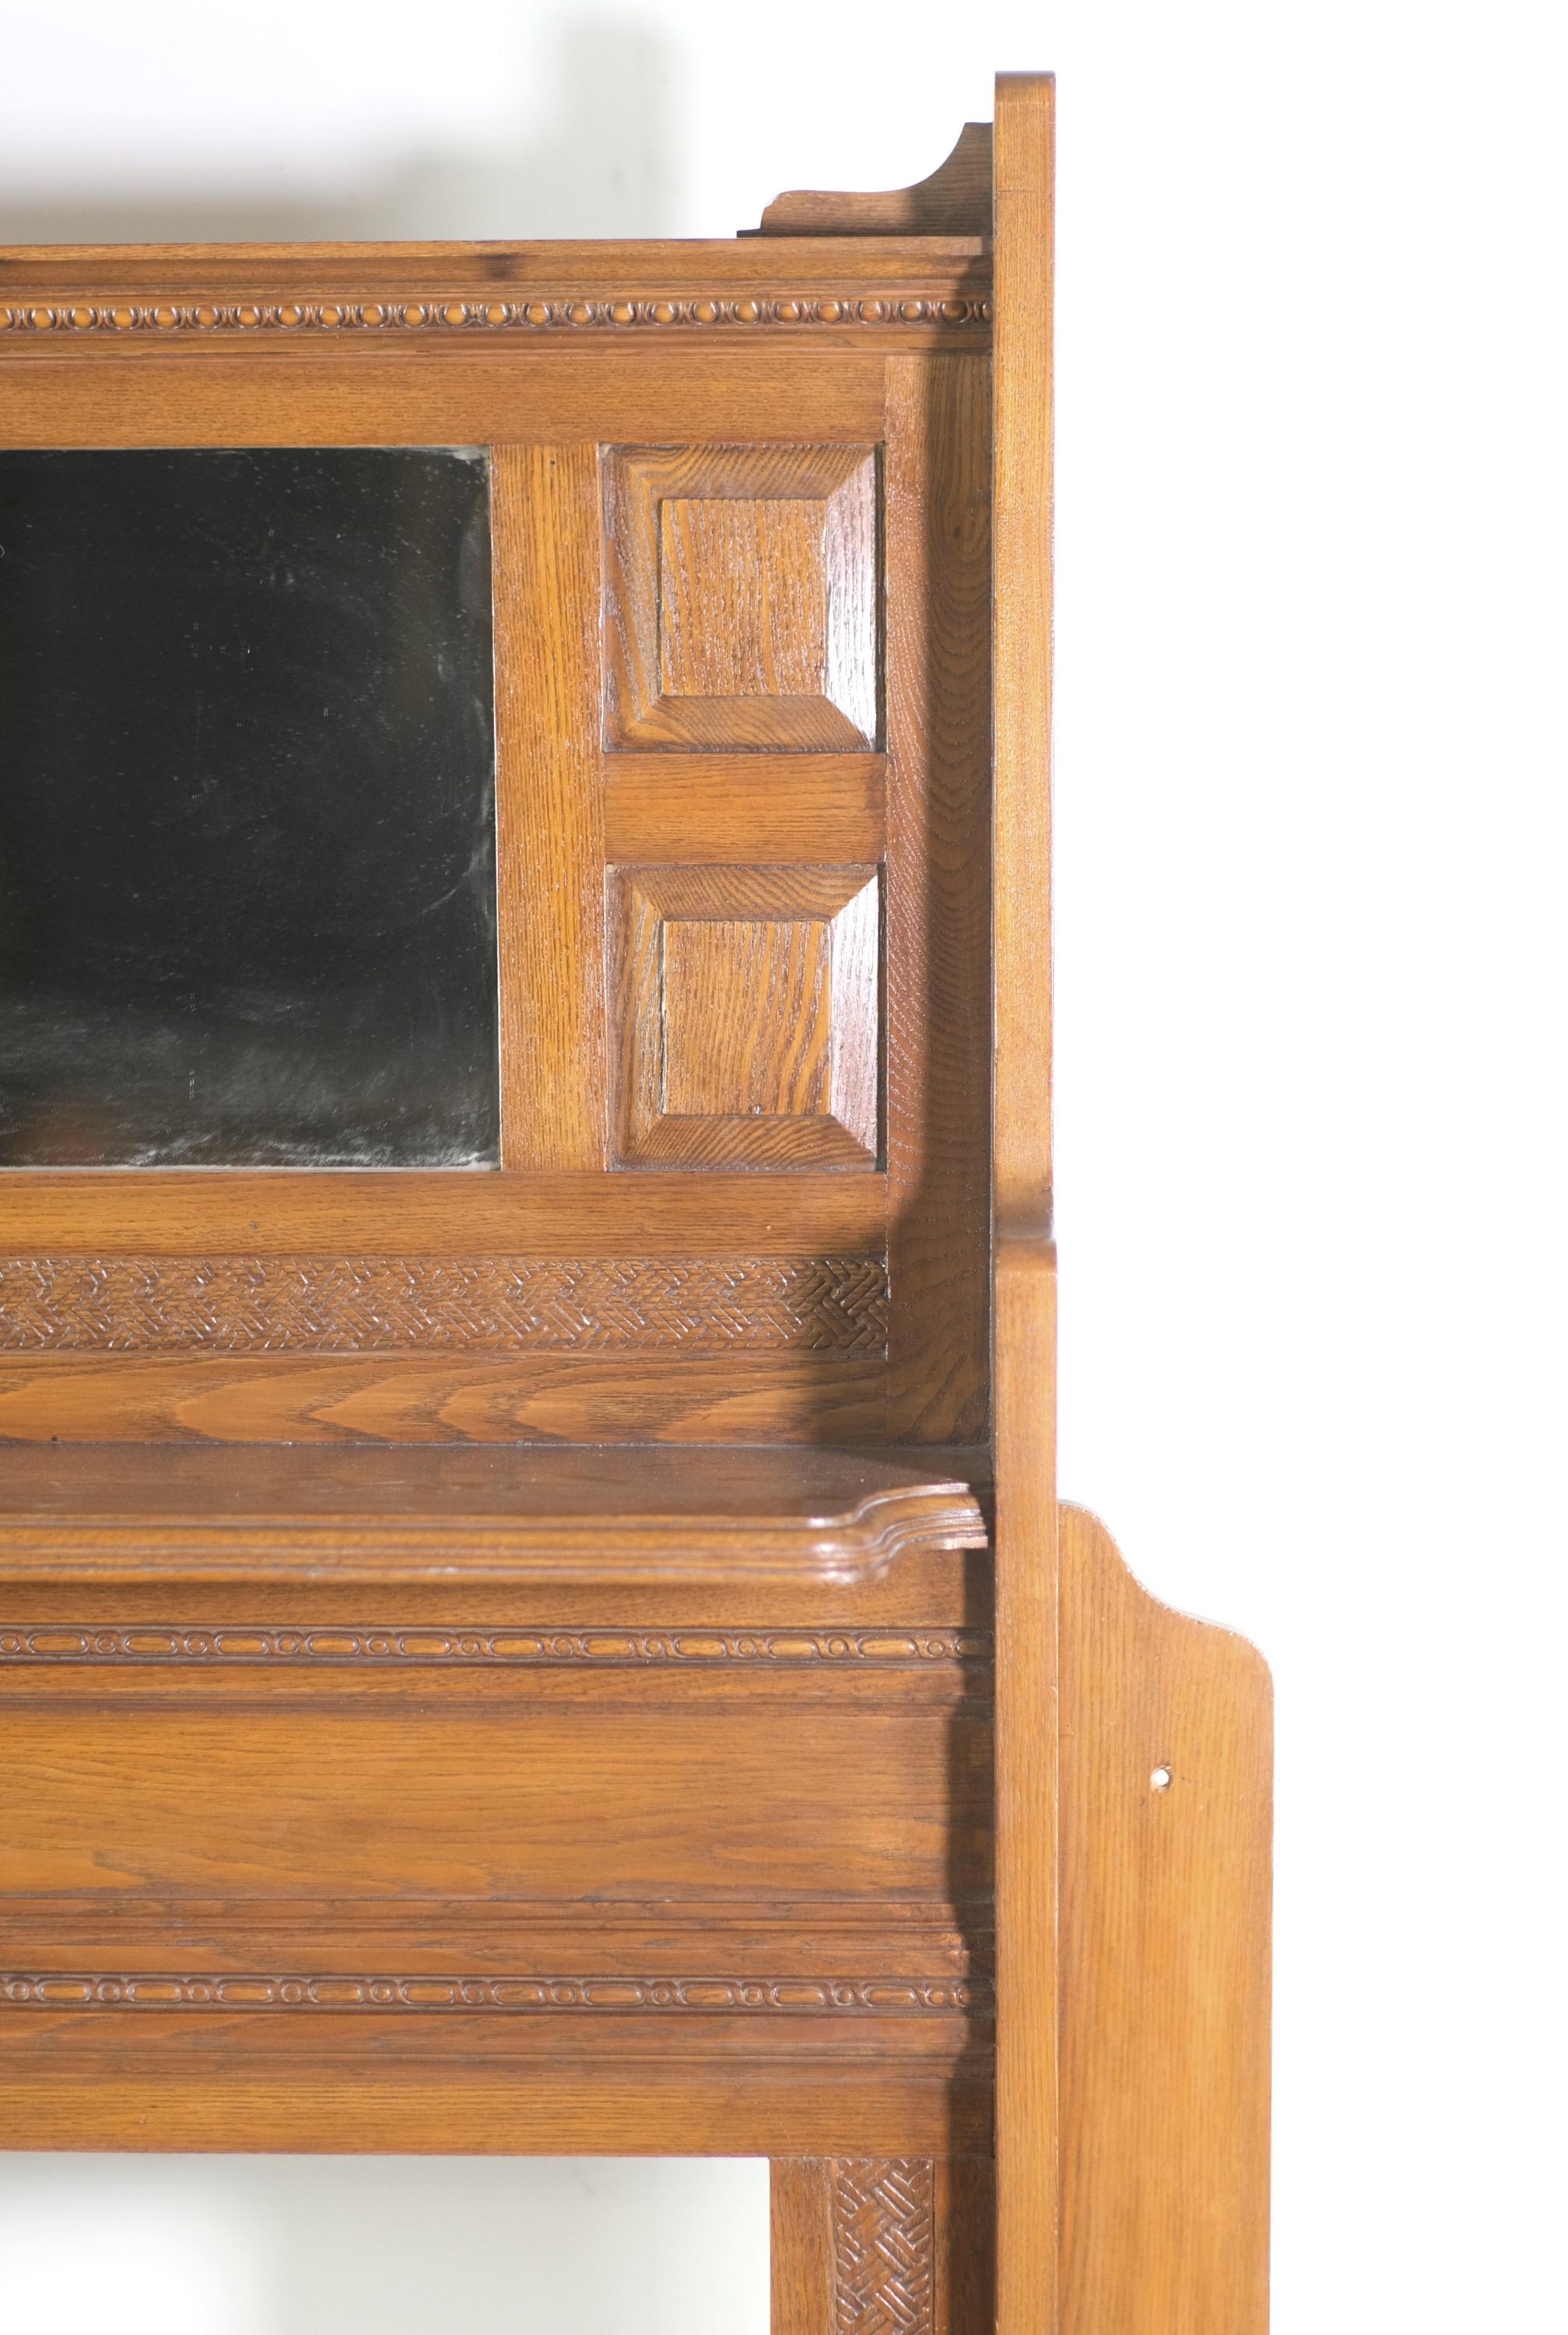 Late 1800s solid ash mantel featuring a basket weave pattern. Original distressed mirror. Fireplace opening has been reinforced and made sturdy with plywood. Manufactured by The Bradley & Currier Co, Ltd, NY, NY. Please note, this item is located in